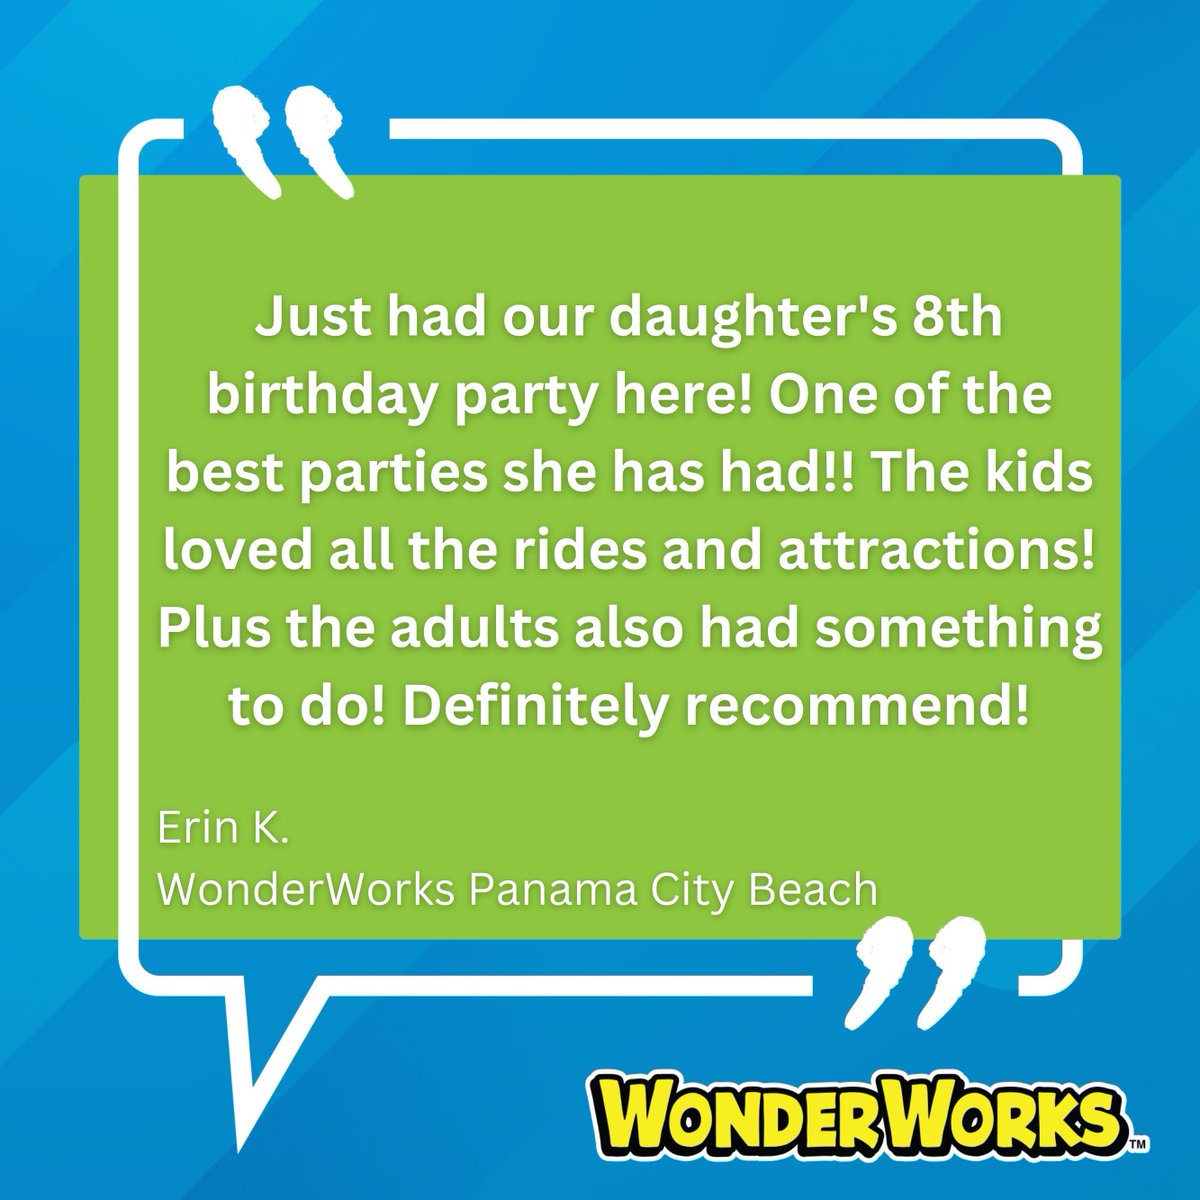 Check out what guests are saying! #BirthdayParties are always a blast at WonderWorks ⭐⭐⭐⭐⭐